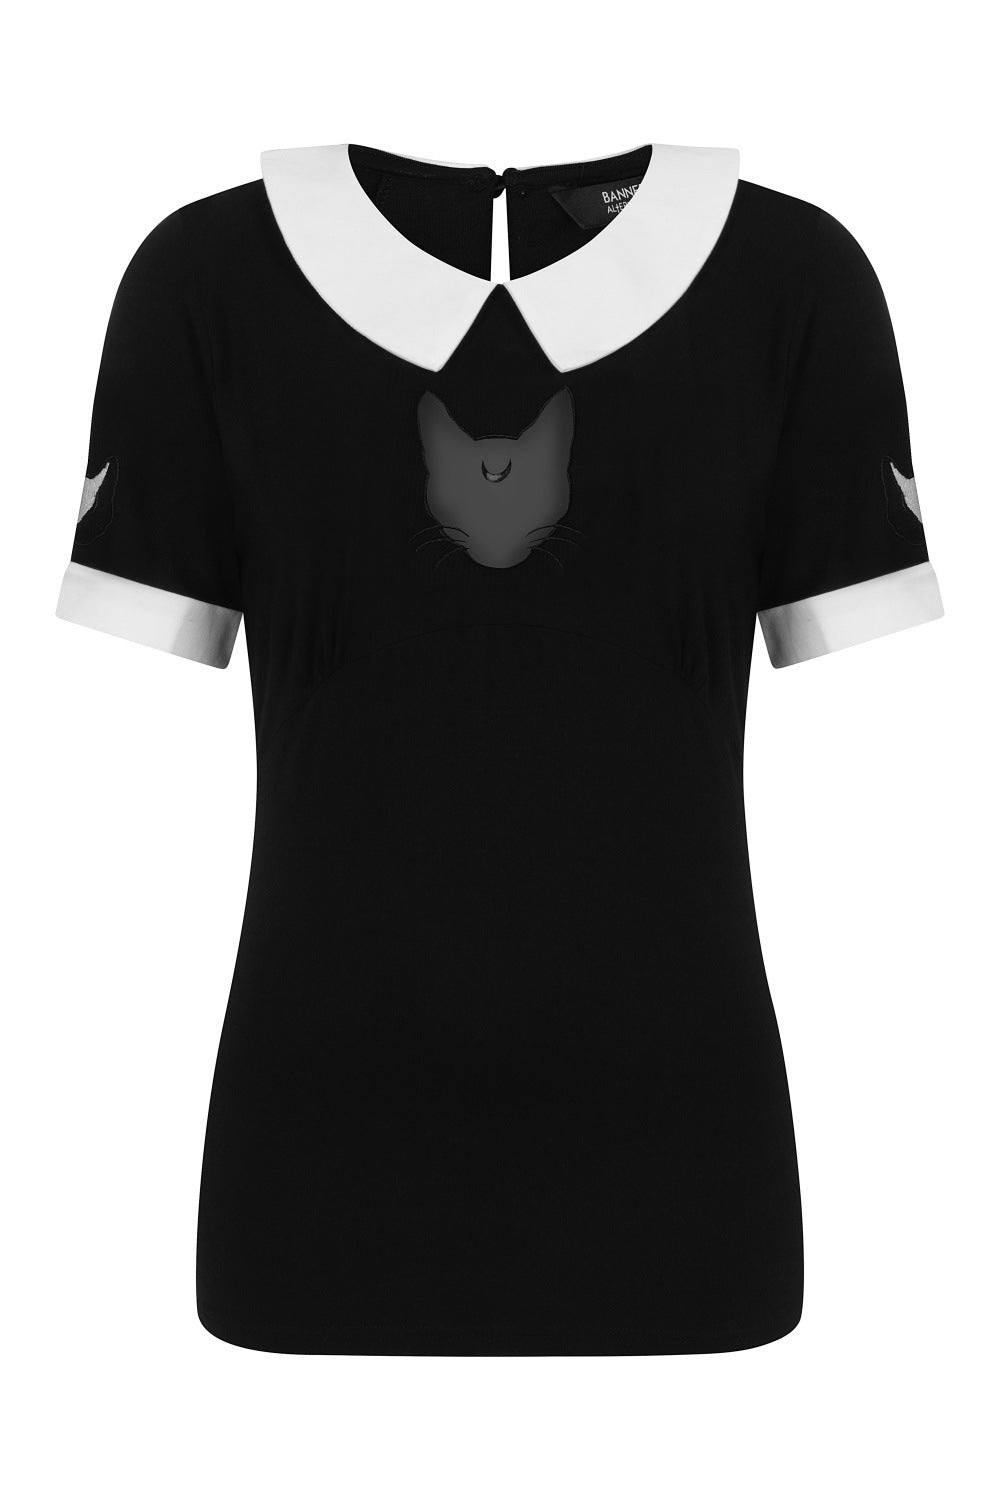 Black short sleeved top with white collar and sleeve cuffs. Cat head mesh panel on the chest.